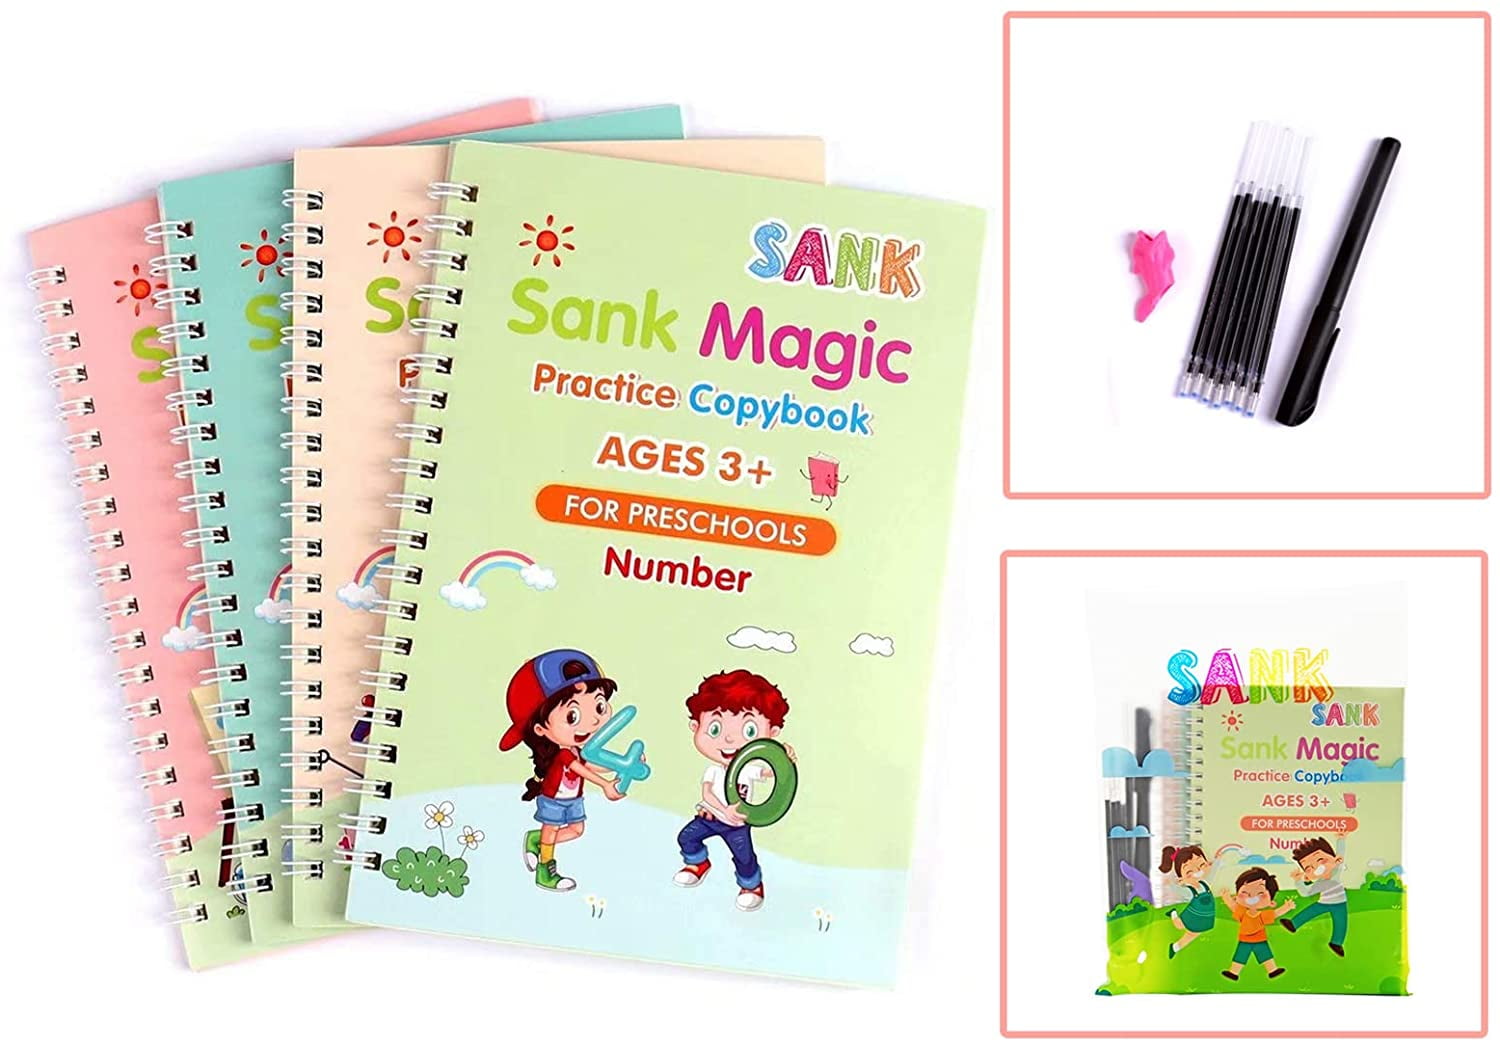 Channie's Magic Groove Book Set, Kids' Reusable Activity Books, Fun  Workbooks for Homeschool or Extra Practice; Improve Handwriting Skills,  Letter & Number Formation, Includes 5 Books 